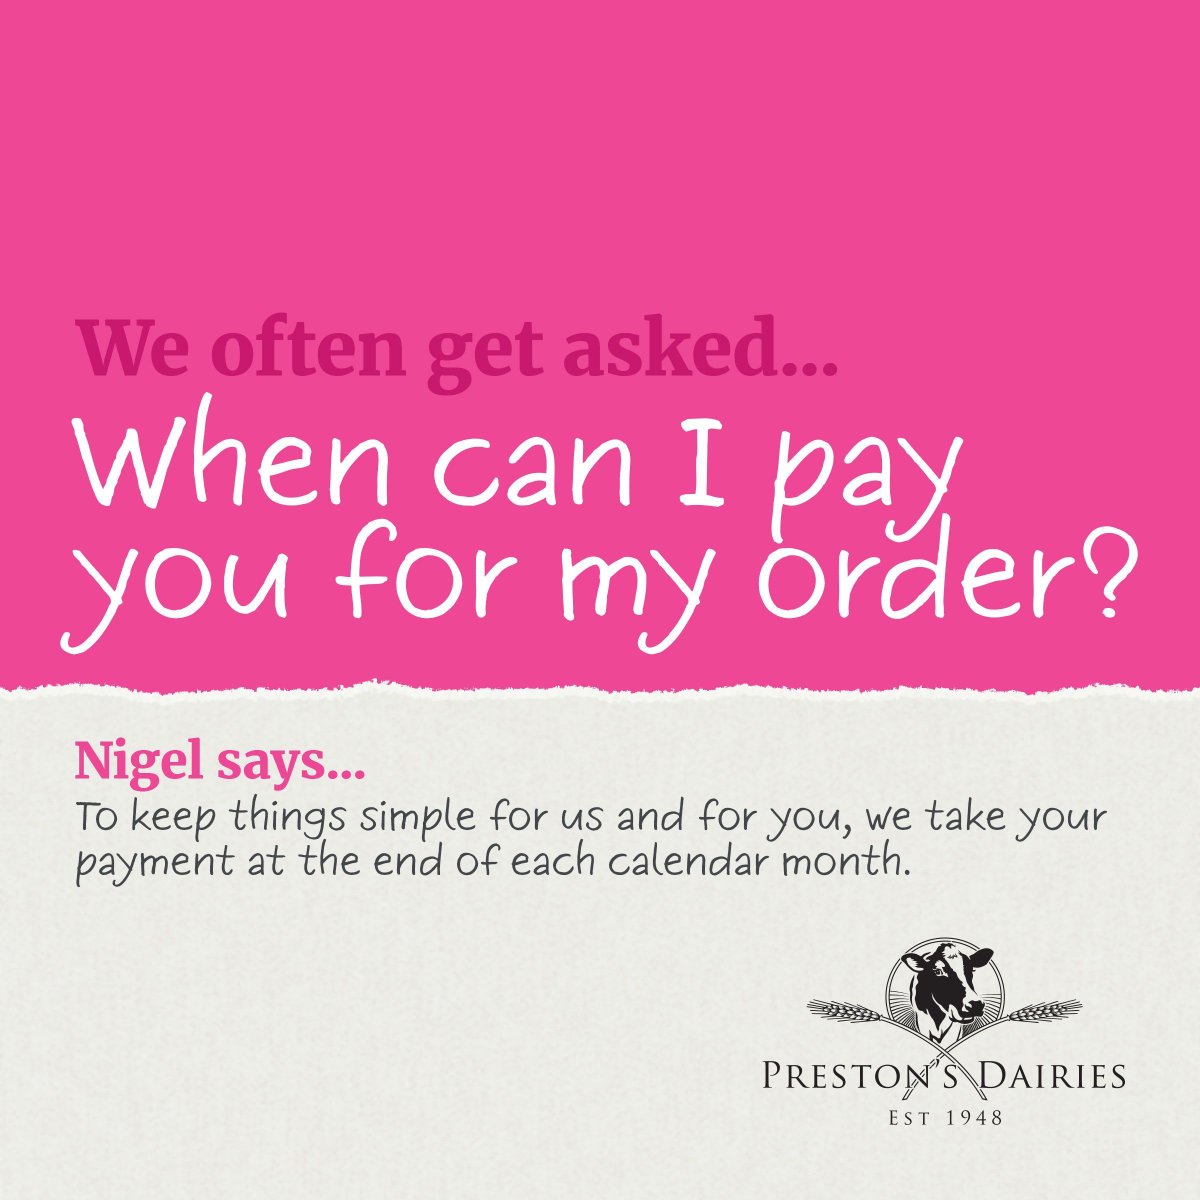 When can I pay you for my order? 💳 We take your payment at the end of every month to keep things simple. #MondayMotivation #MondayFunday #ManicMonday #MilkmanService #DailyDelivery #LocalProduce #SupportLocalBusinesses #ShopSmall #SupportLocalBusinesses #ShopSmall #ShopLocalUK